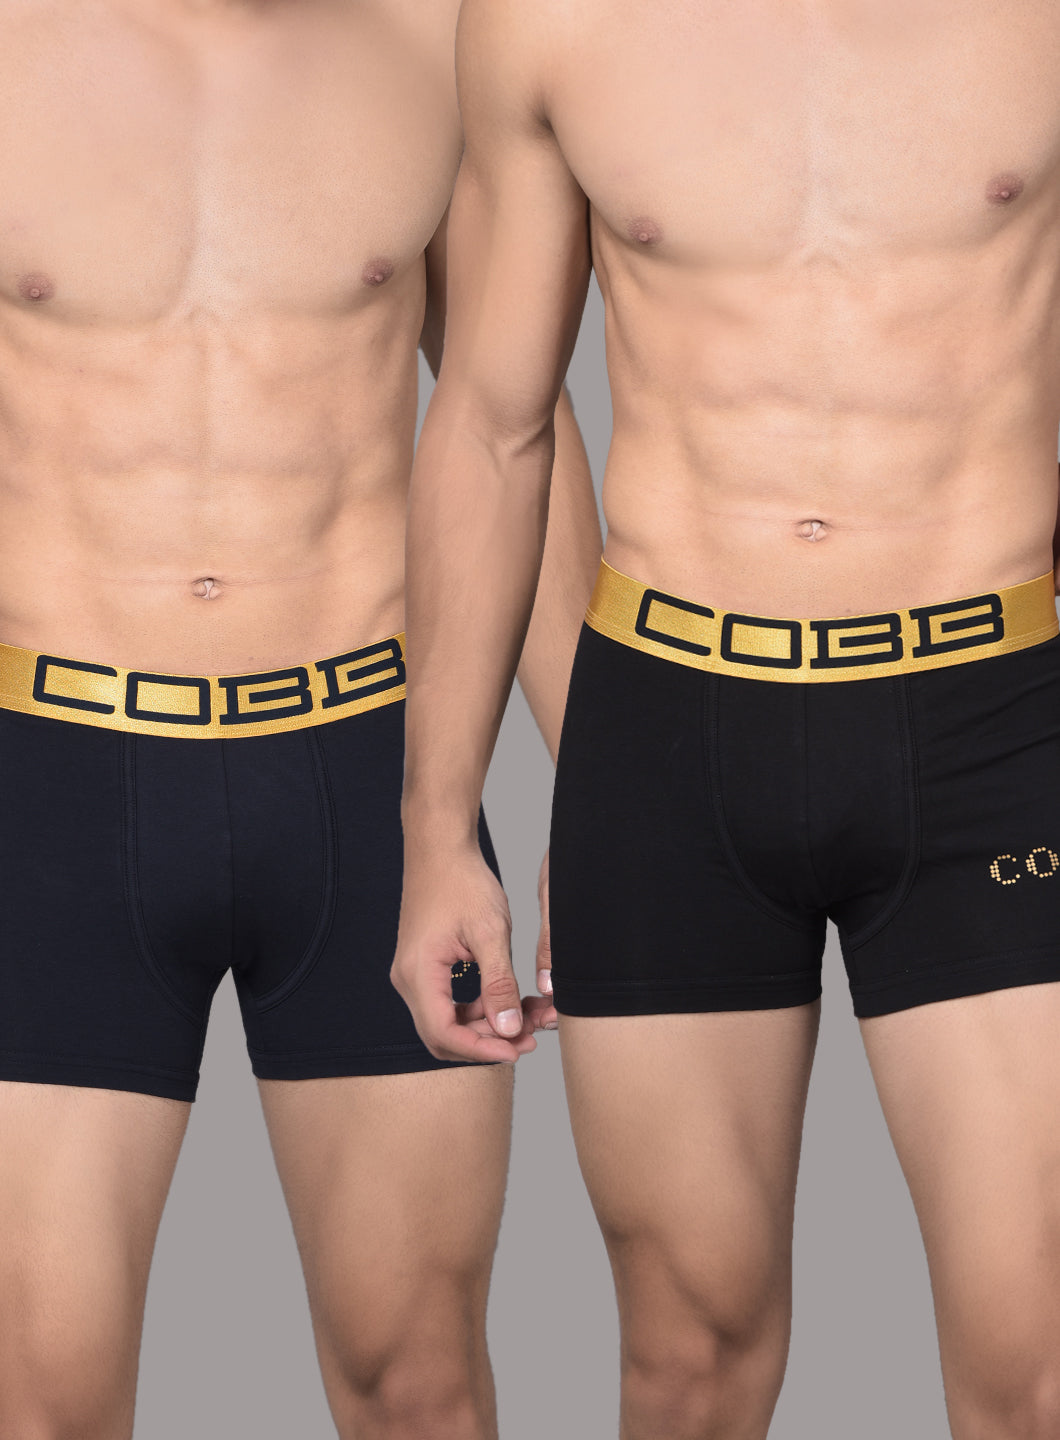 Cobb Mens Cotton Black and Navy Solid Premium Trunk (Pack of 2) Assorted